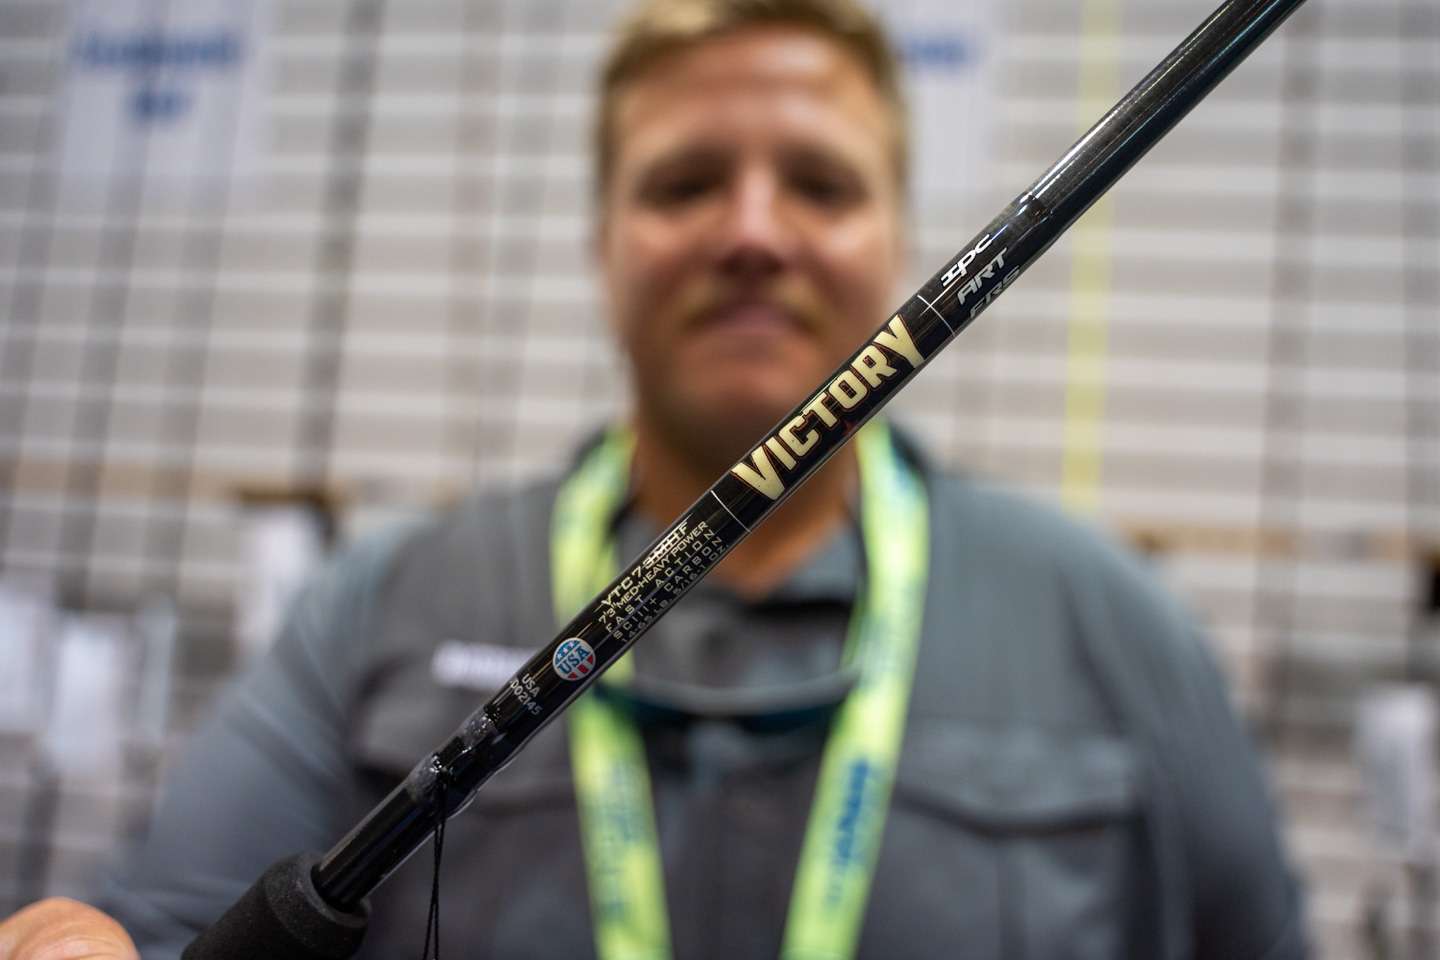 <b>St. Croix Victory Rods</b><br> Designed with the inputs of Bassheads nationwide. Features 25 balanced models focused on techniques, comfort, and the ultimate in fish-ability. 